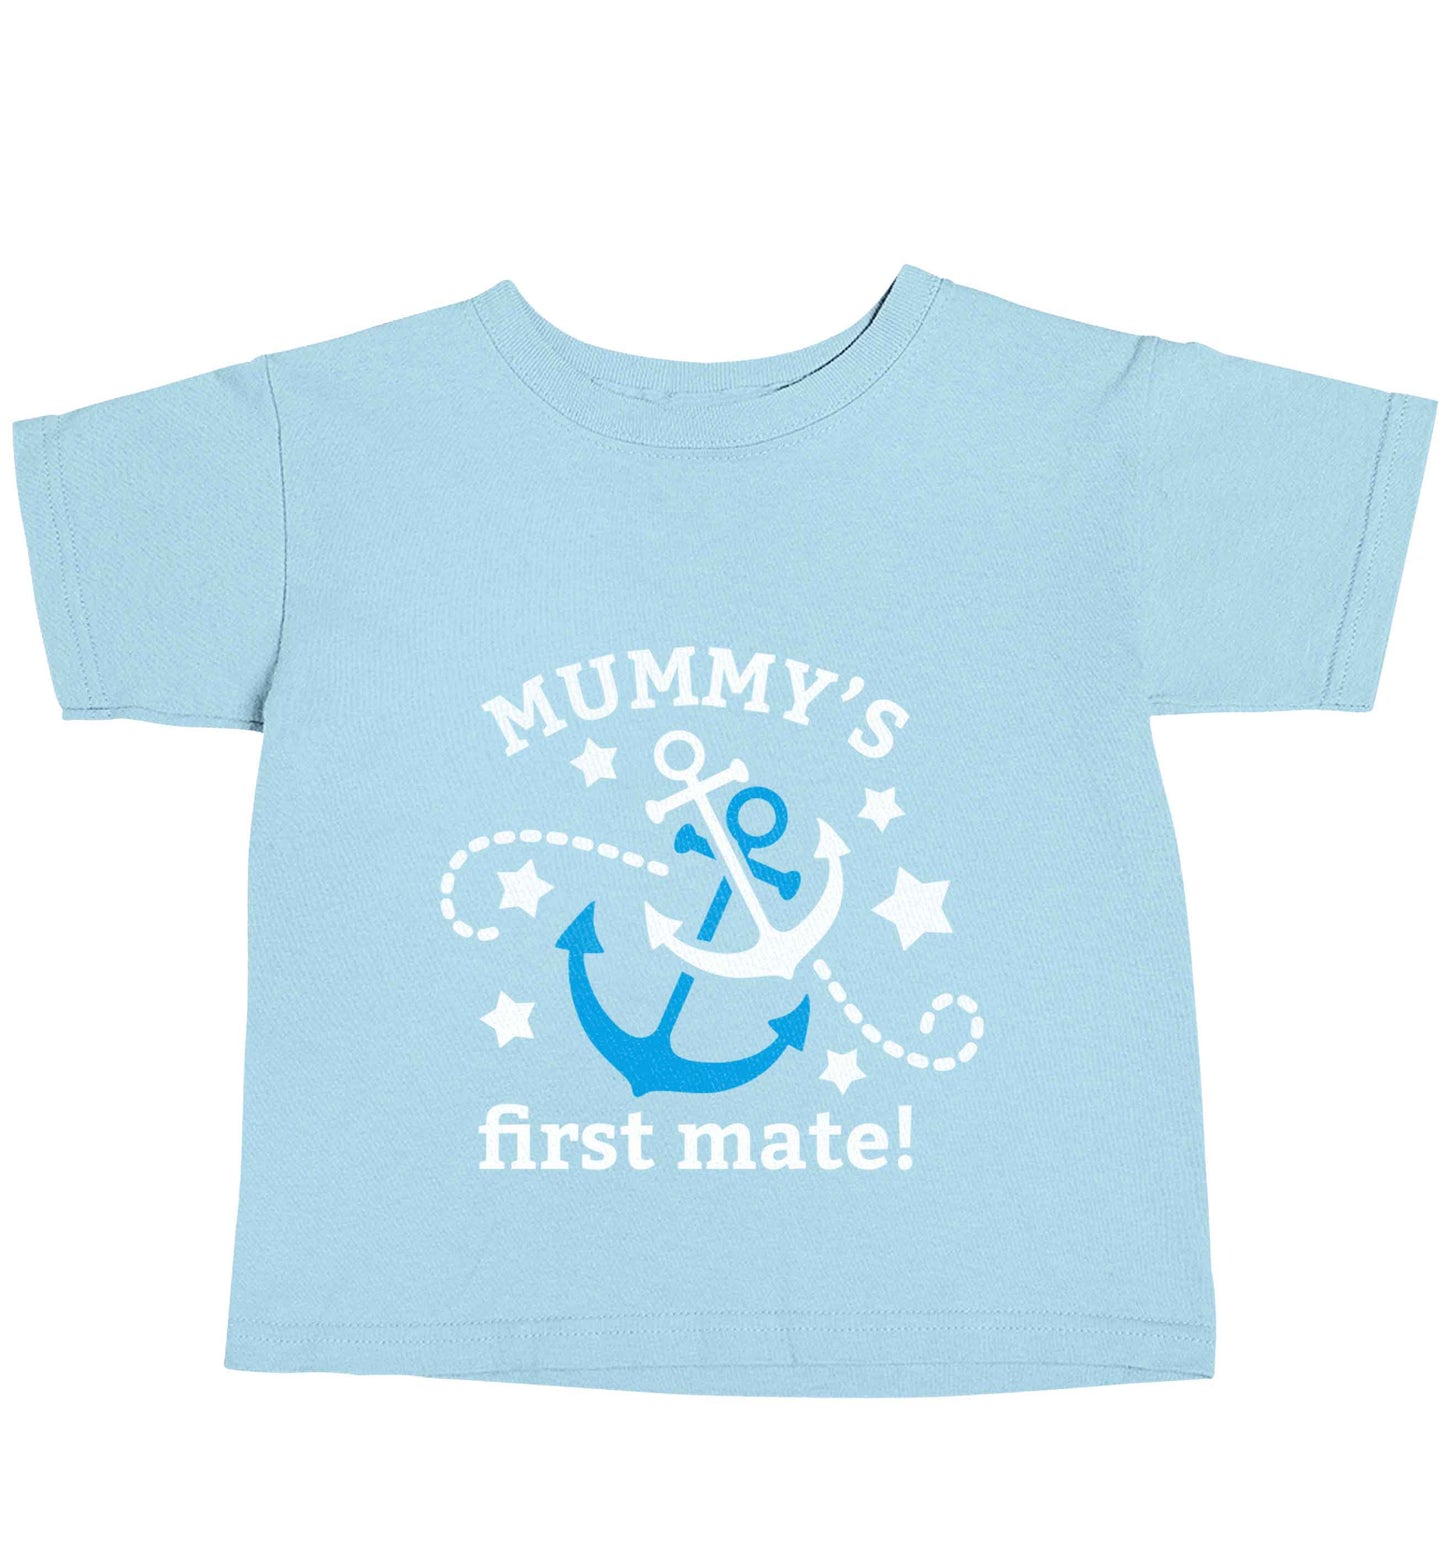 Mummy's First Mate light blue baby toddler Tshirt 2 Years